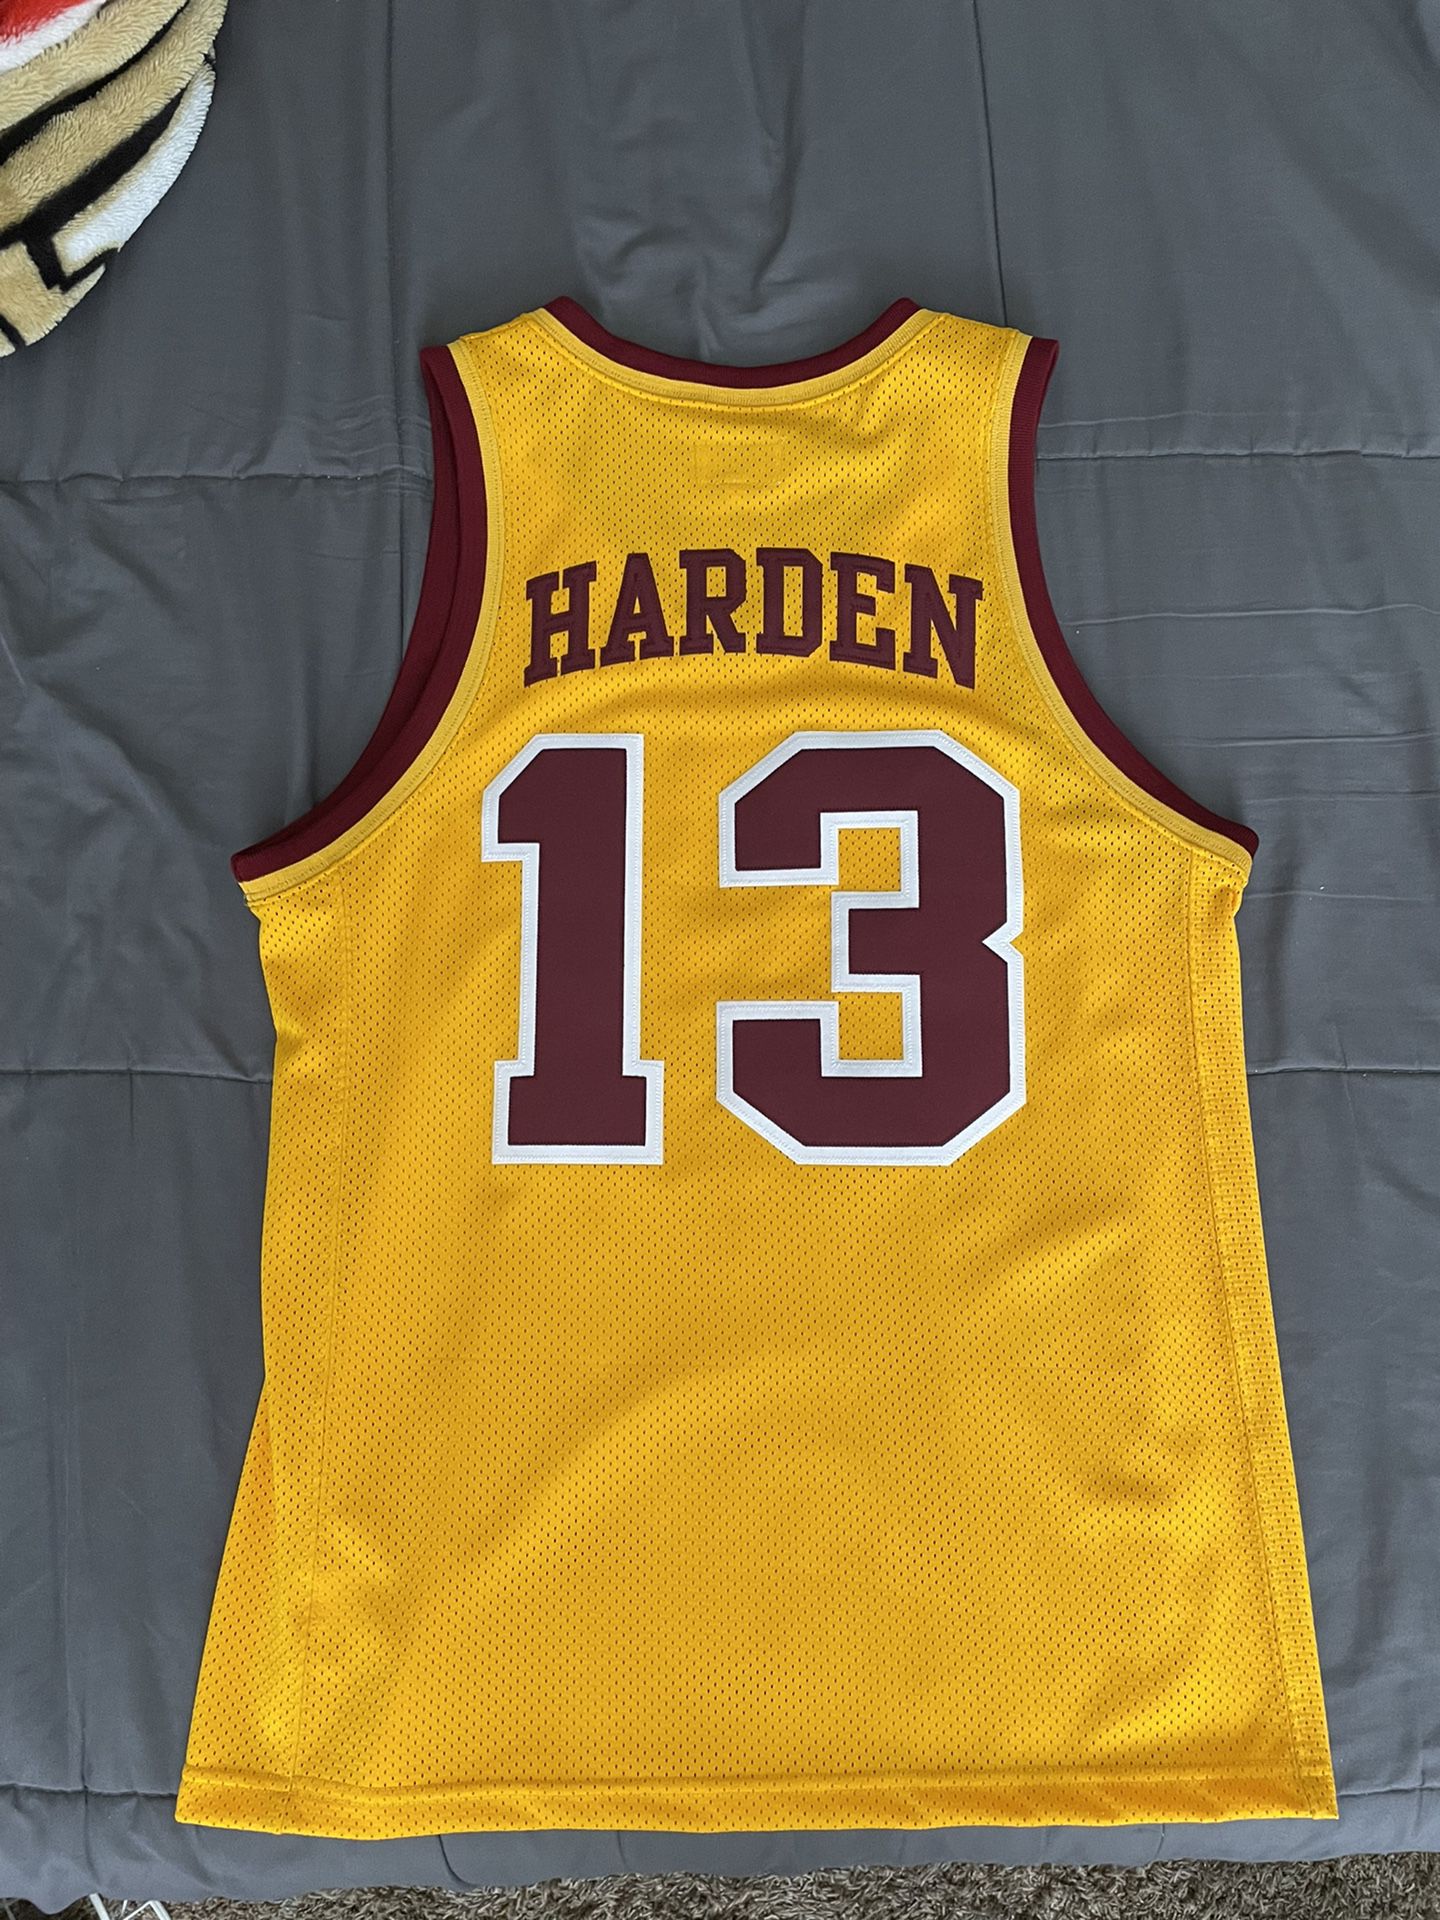 James Harden Arizona State College Jersey (Retro) for Sale in Fontana, CA -  OfferUp